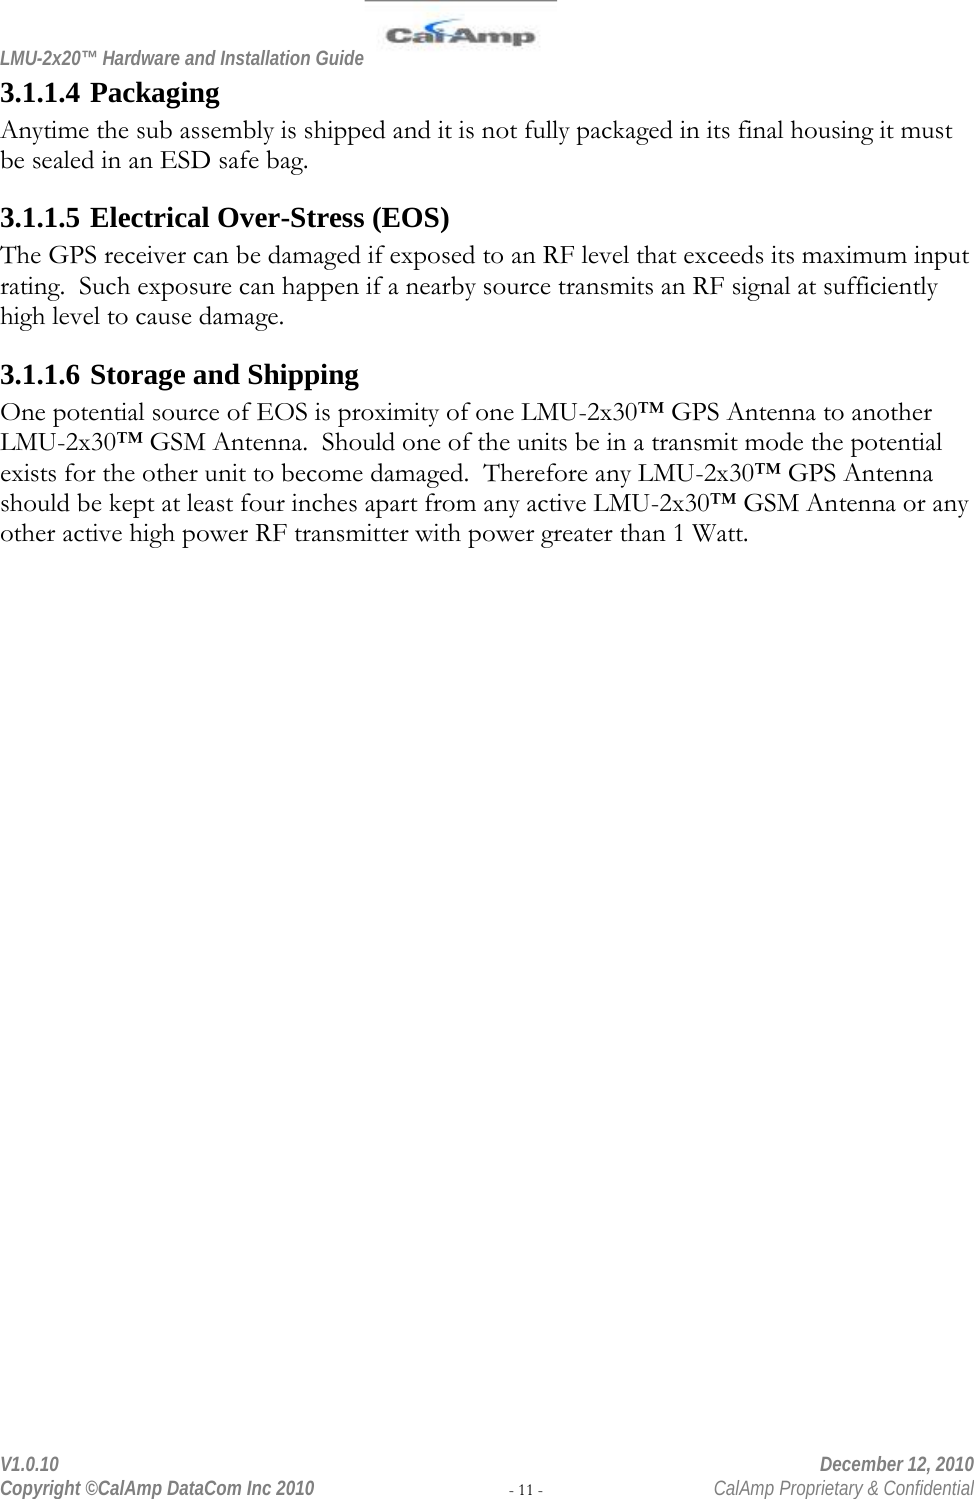 LMU-2x20™ Hardware and Installation Guide  V1.0.10    December 12, 2010 Copyright ©CalAmp DataCom Inc 2010 - 11 -  CalAmp Proprietary &amp; Confidential 3.1.1.4 Packaging Anytime the sub assembly is shipped and it is not fully packaged in its final housing it must be sealed in an ESD safe bag. 3.1.1.5 Electrical Over-Stress (EOS) The GPS receiver can be damaged if exposed to an RF level that exceeds its maximum input rating.  Such exposure can happen if a nearby source transmits an RF signal at sufficiently high level to cause damage. 3.1.1.6 Storage and Shipping One potential source of EOS is proximity of one LMU-2x30™ GPS Antenna to another LMU-2x30™ GSM Antenna.  Should one of the units be in a transmit mode the potential exists for the other unit to become damaged.  Therefore any LMU-2x30™ GPS Antenna should be kept at least four inches apart from any active LMU-2x30™ GSM Antenna or any other active high power RF transmitter with power greater than 1 Watt.  